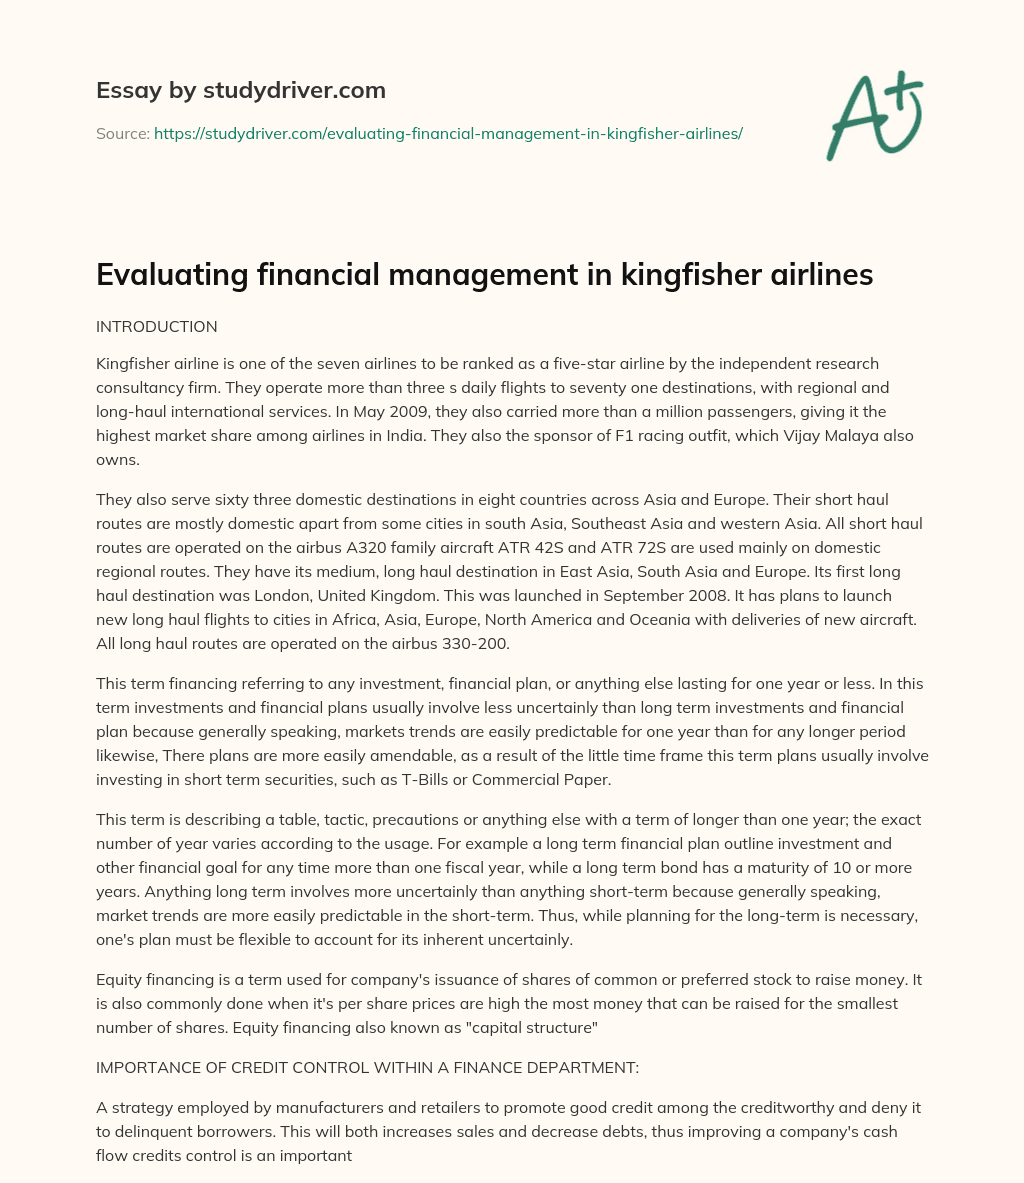 Evaluating Financial Management in Kingfisher Airlines essay